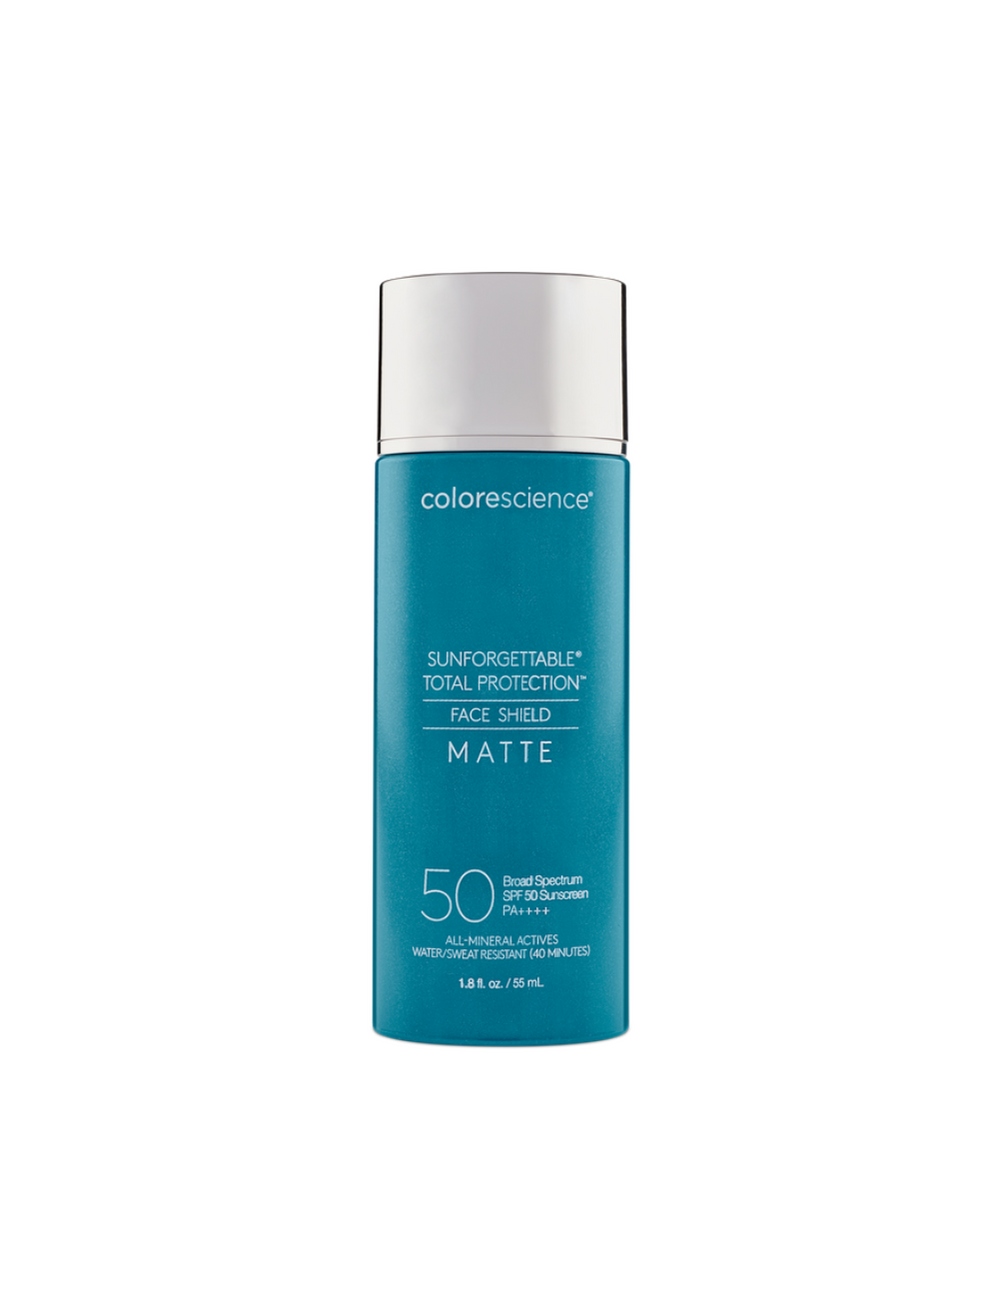 SUNFORGETTABLE® TOTAL PROTECTION™ FACE SHIELD MATTE SPF 50